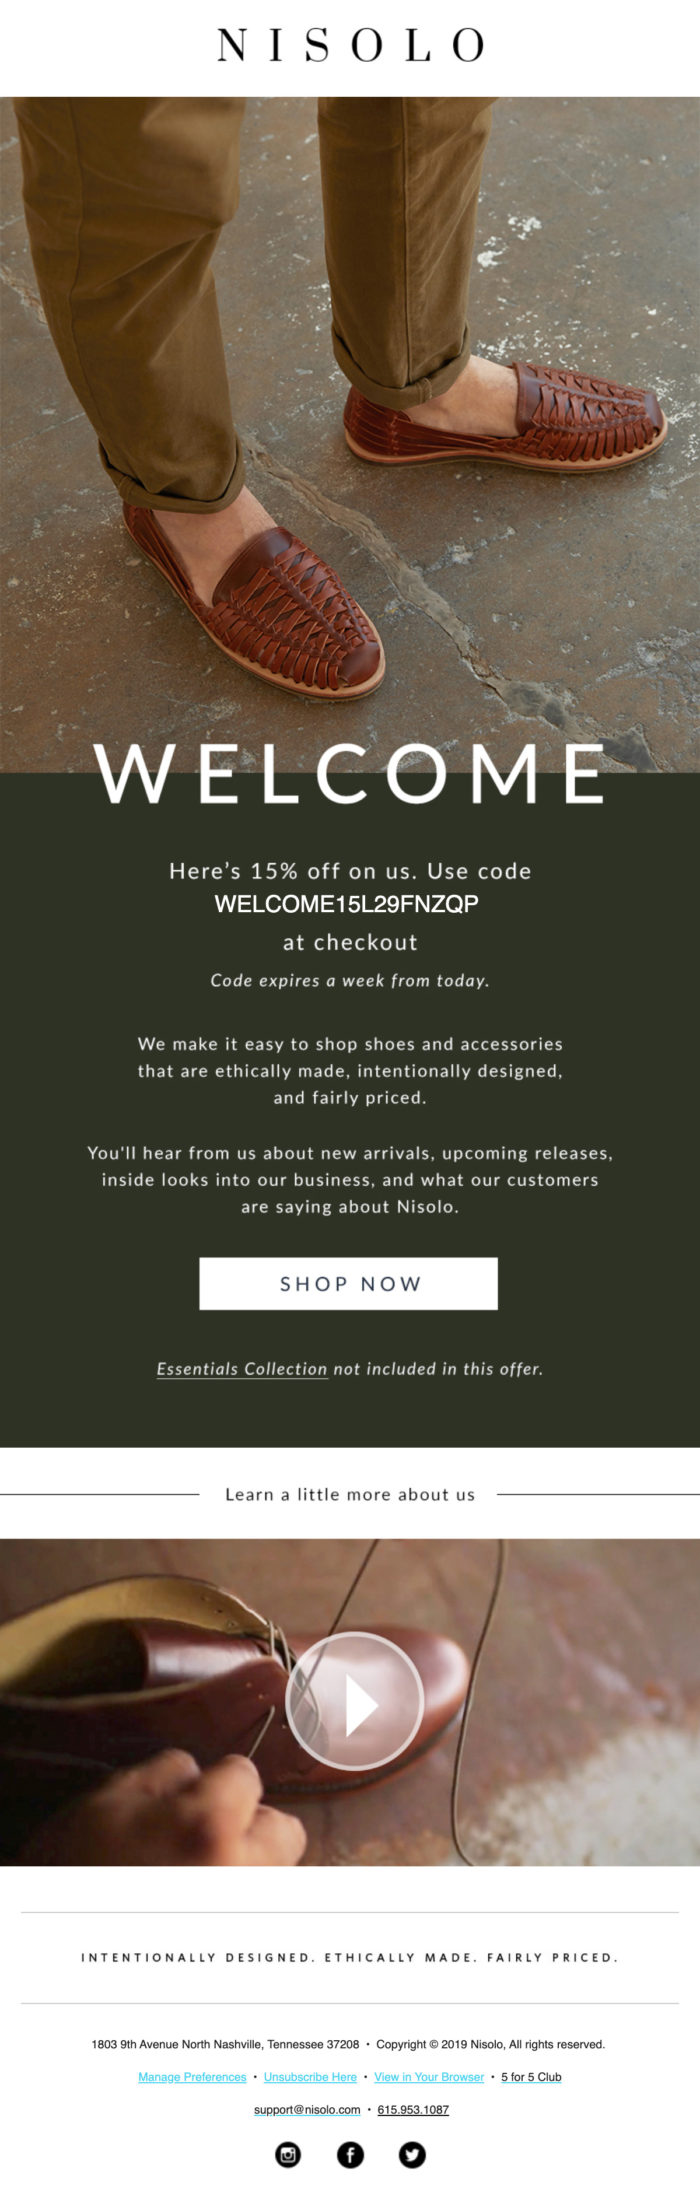 Nisolo's welcome email with a 15% off coupon and explanation of what the newsletters will contain